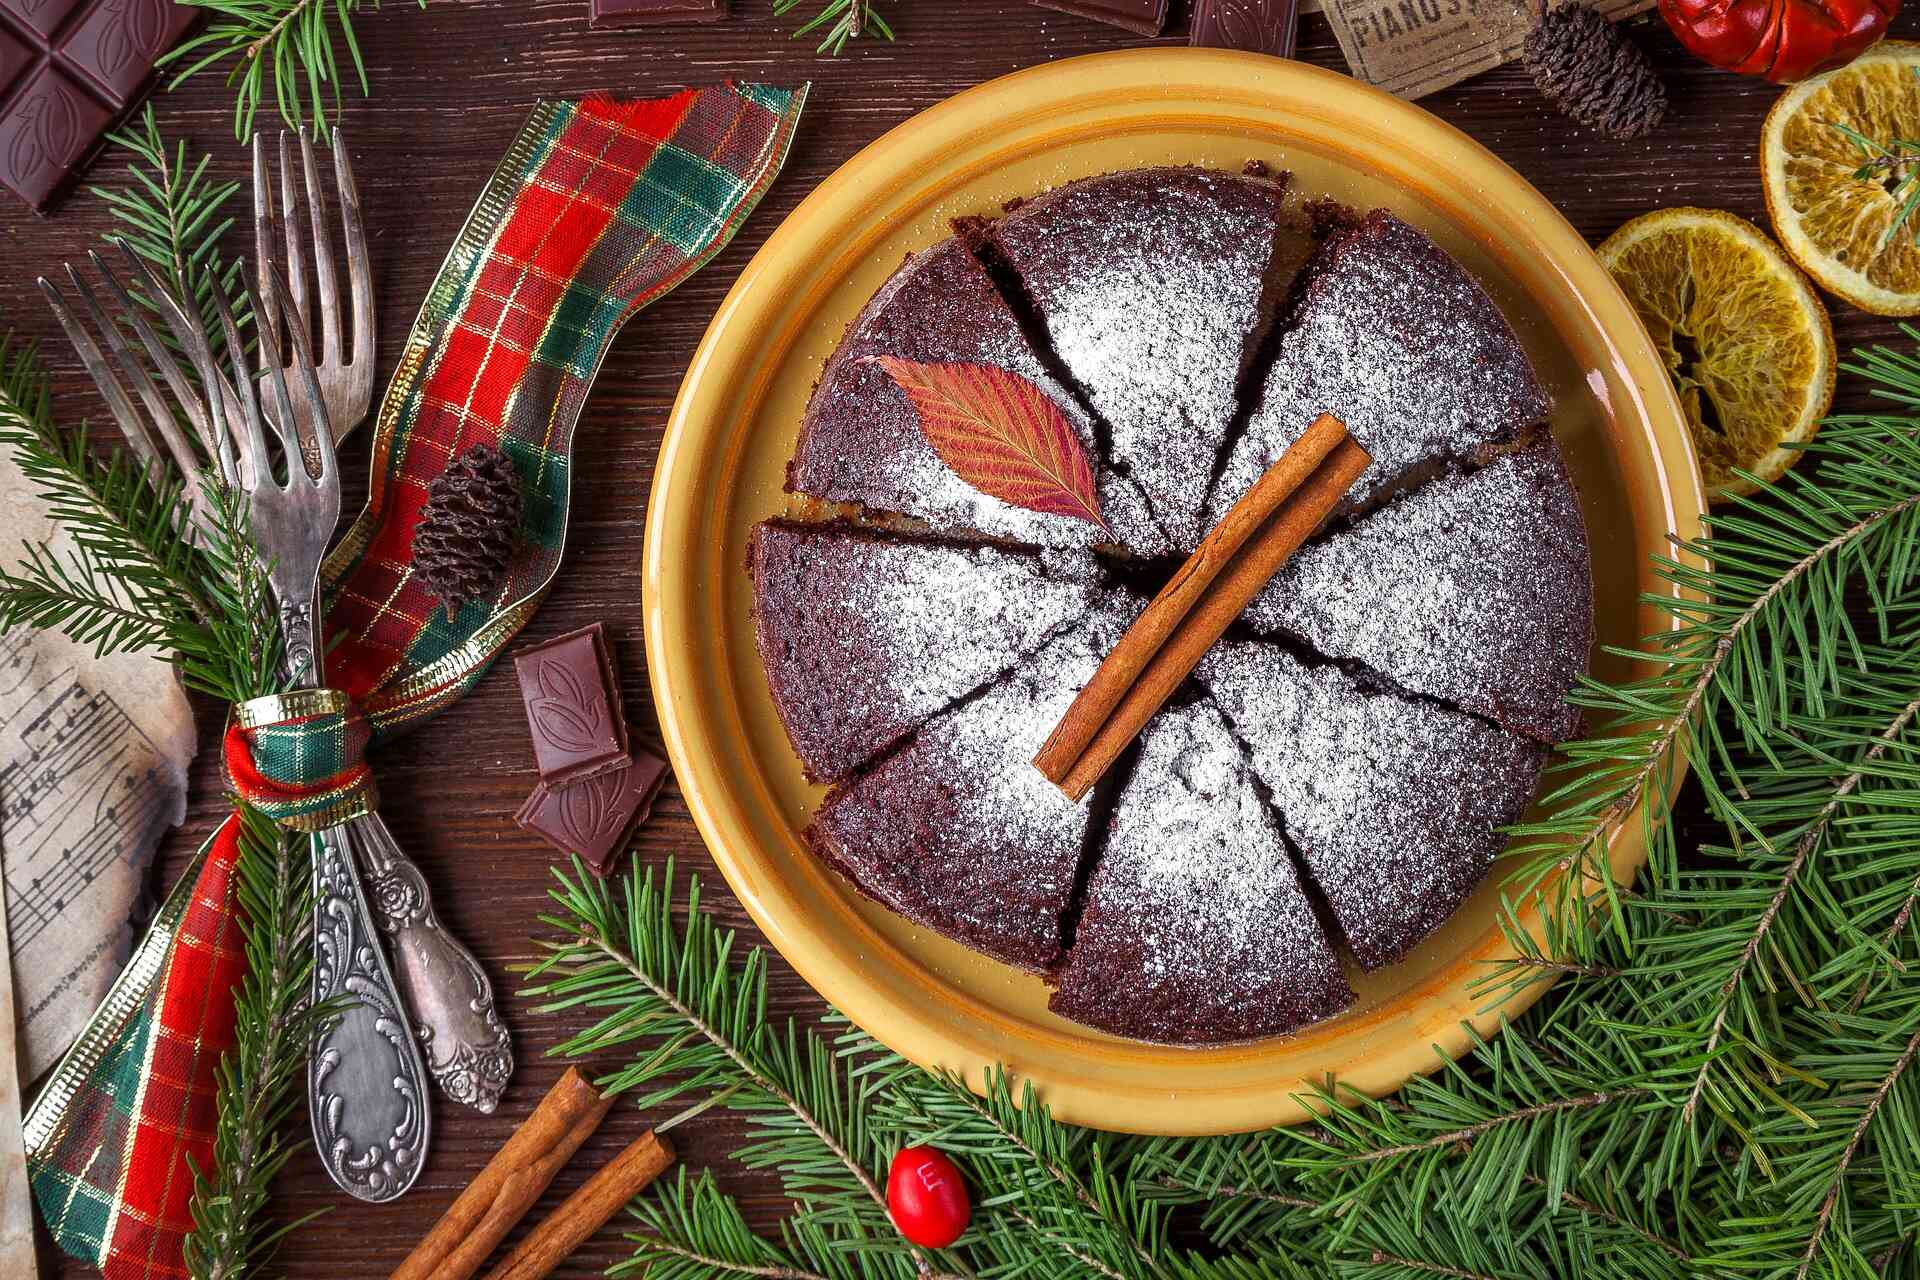 Thomas uses simple tools for great cakes during Christmas. Courtesy: Pixabay 